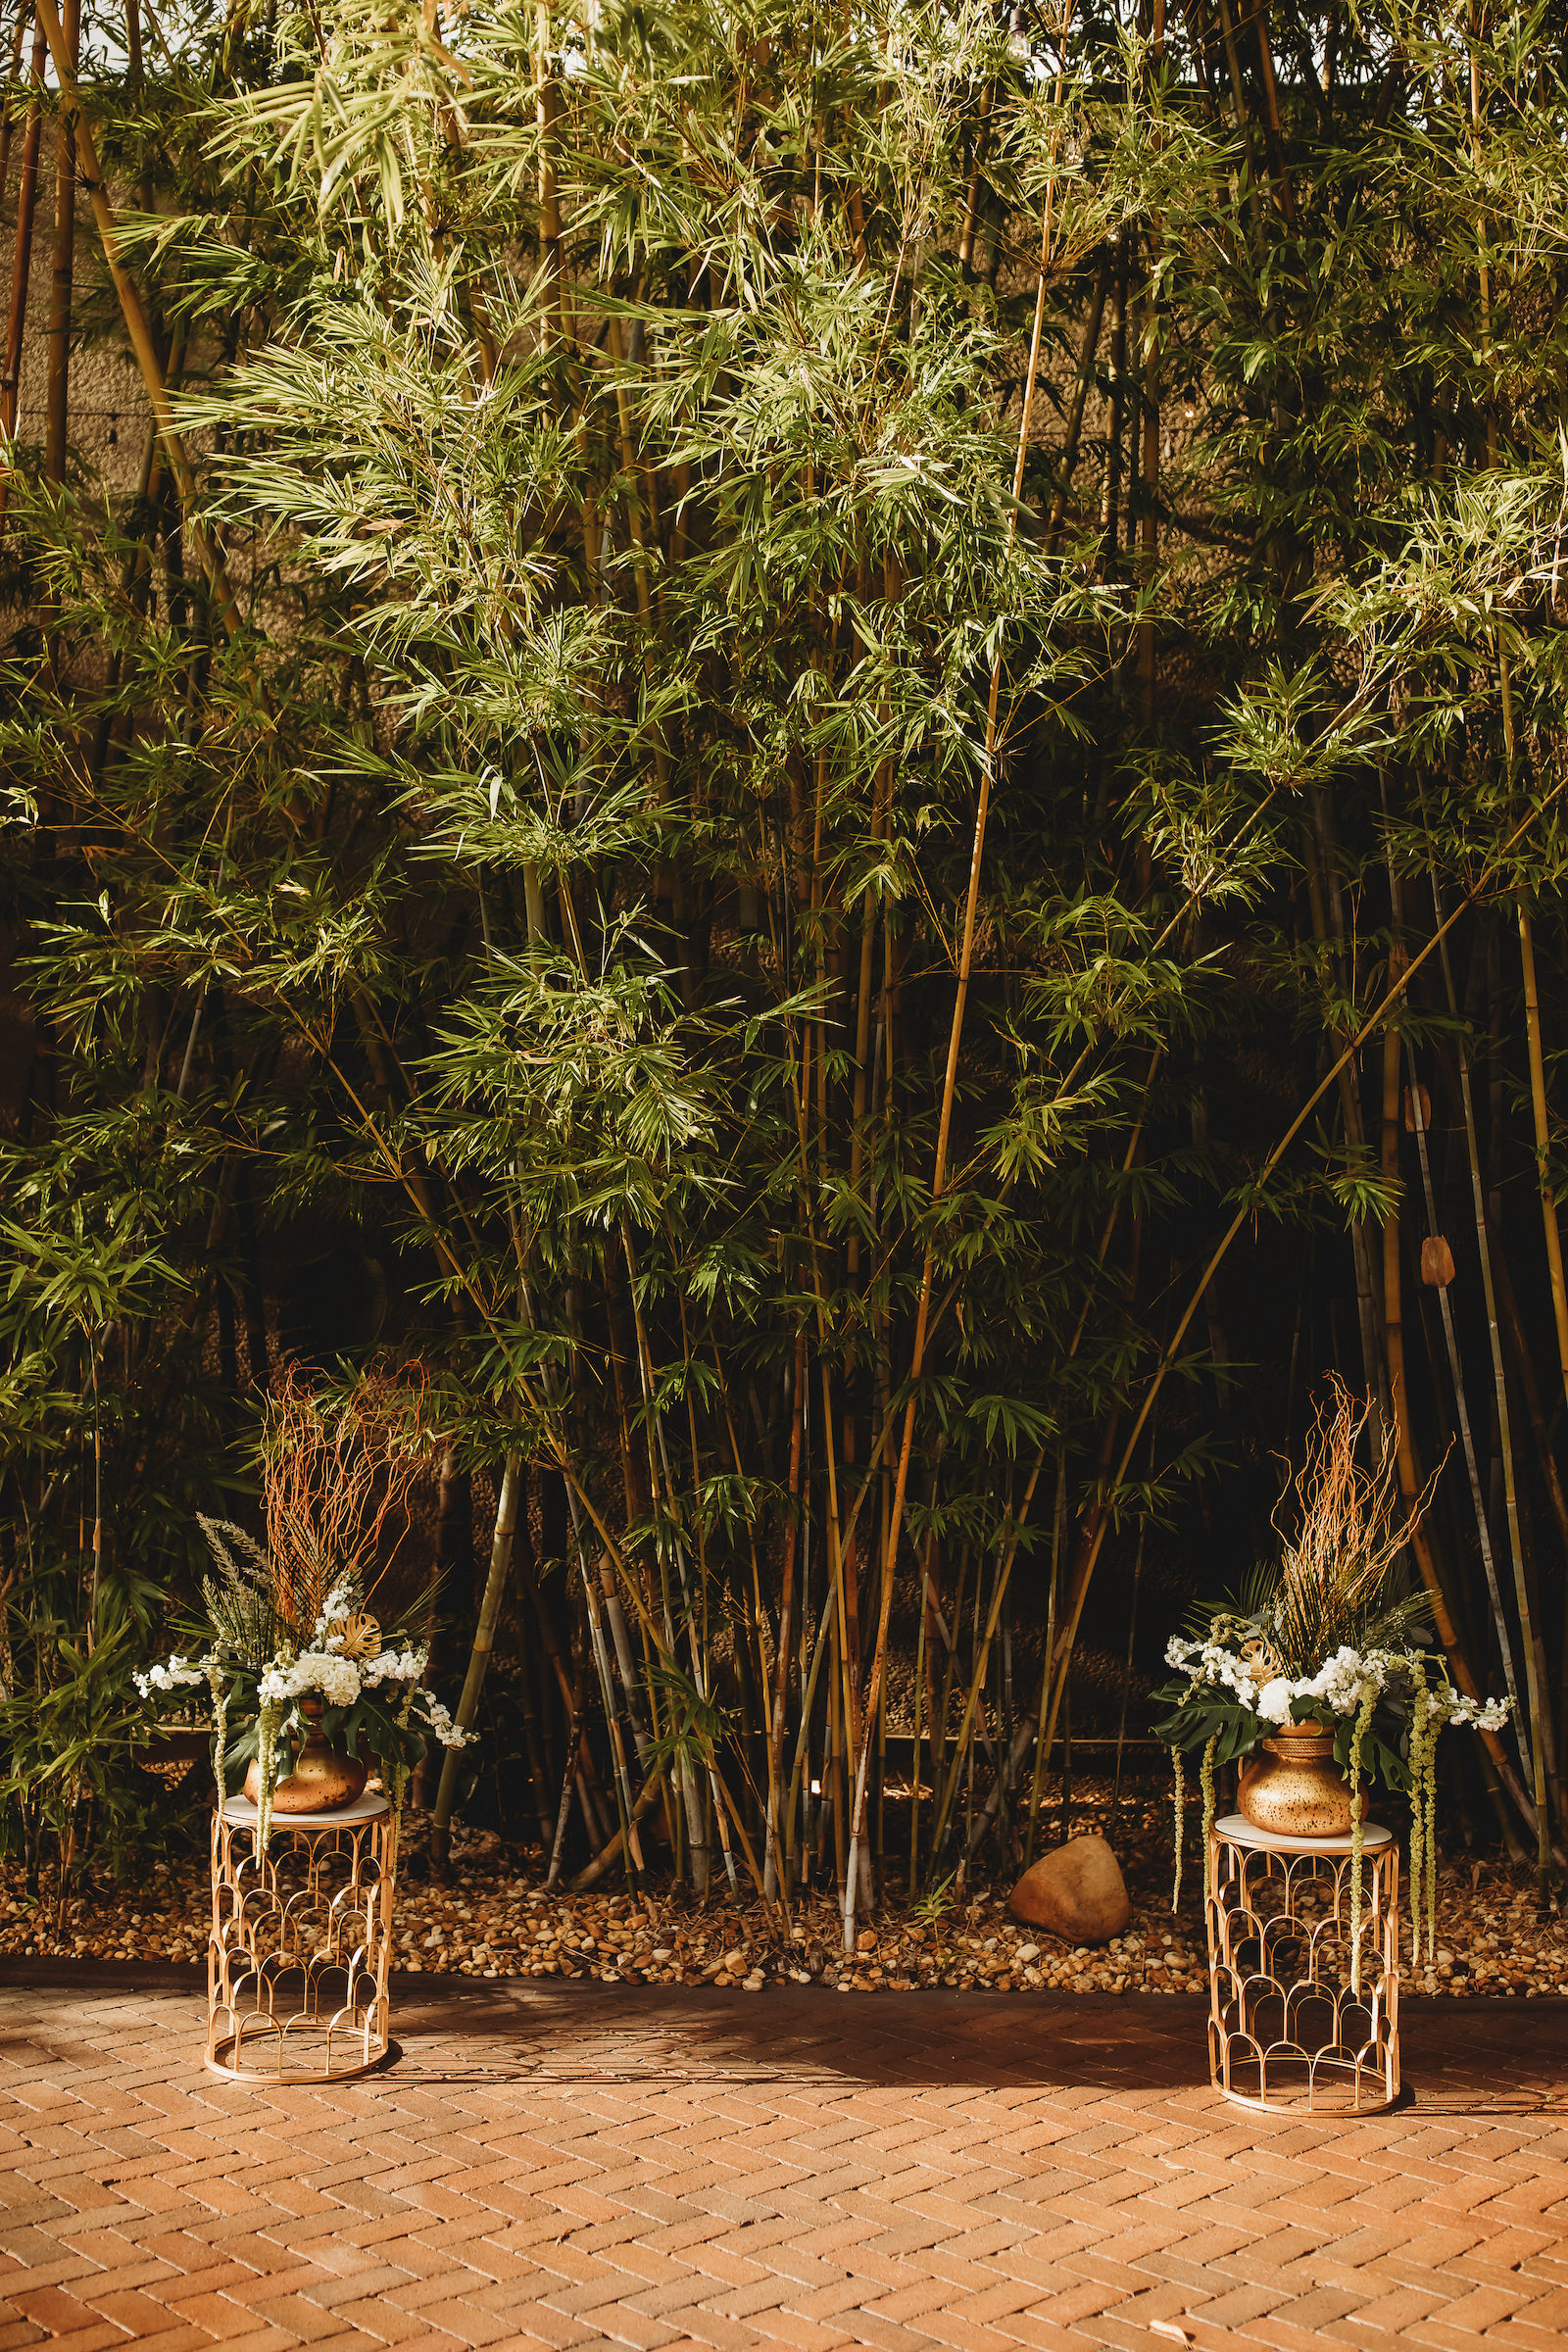 Modern Tropical Inspired Florida Wedding Ceremony in Bamboo Garden, DIY Floral Centerpieces with Bronze Base and Greenery | Downtown St. Pete Historic Wedding Venue NOVA 535 - Courtyard